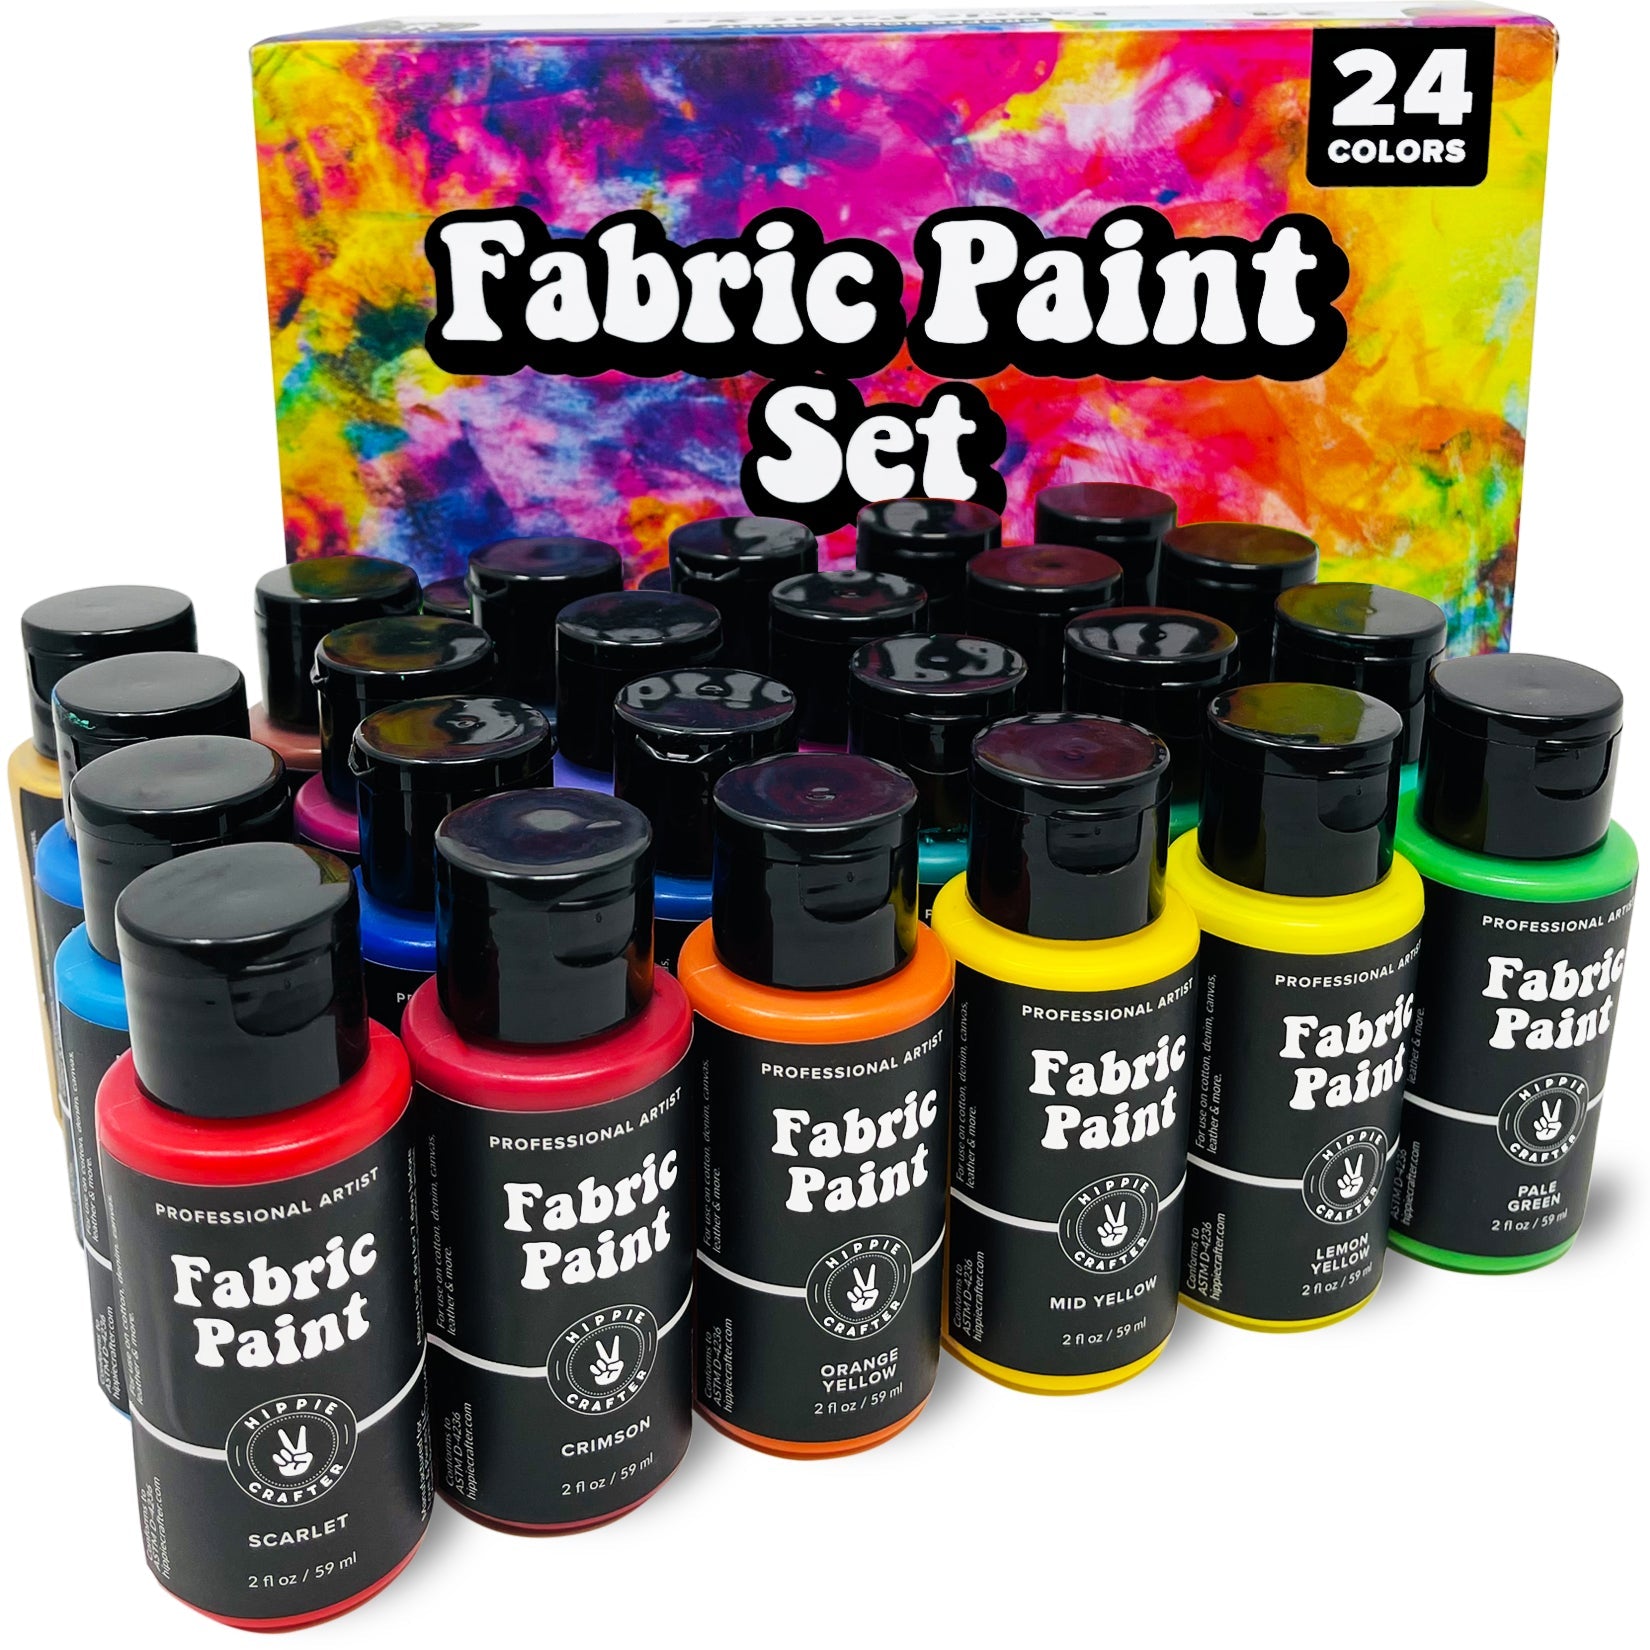 Permanent Fabric Paint for Clothes 24 Colors Bulk Kit for Upholstery  Outdoor Cushions Shoe Paint Decorating Medium Acrylic Set Metallic Gold,  White, Red, Yellow, Orange Pink